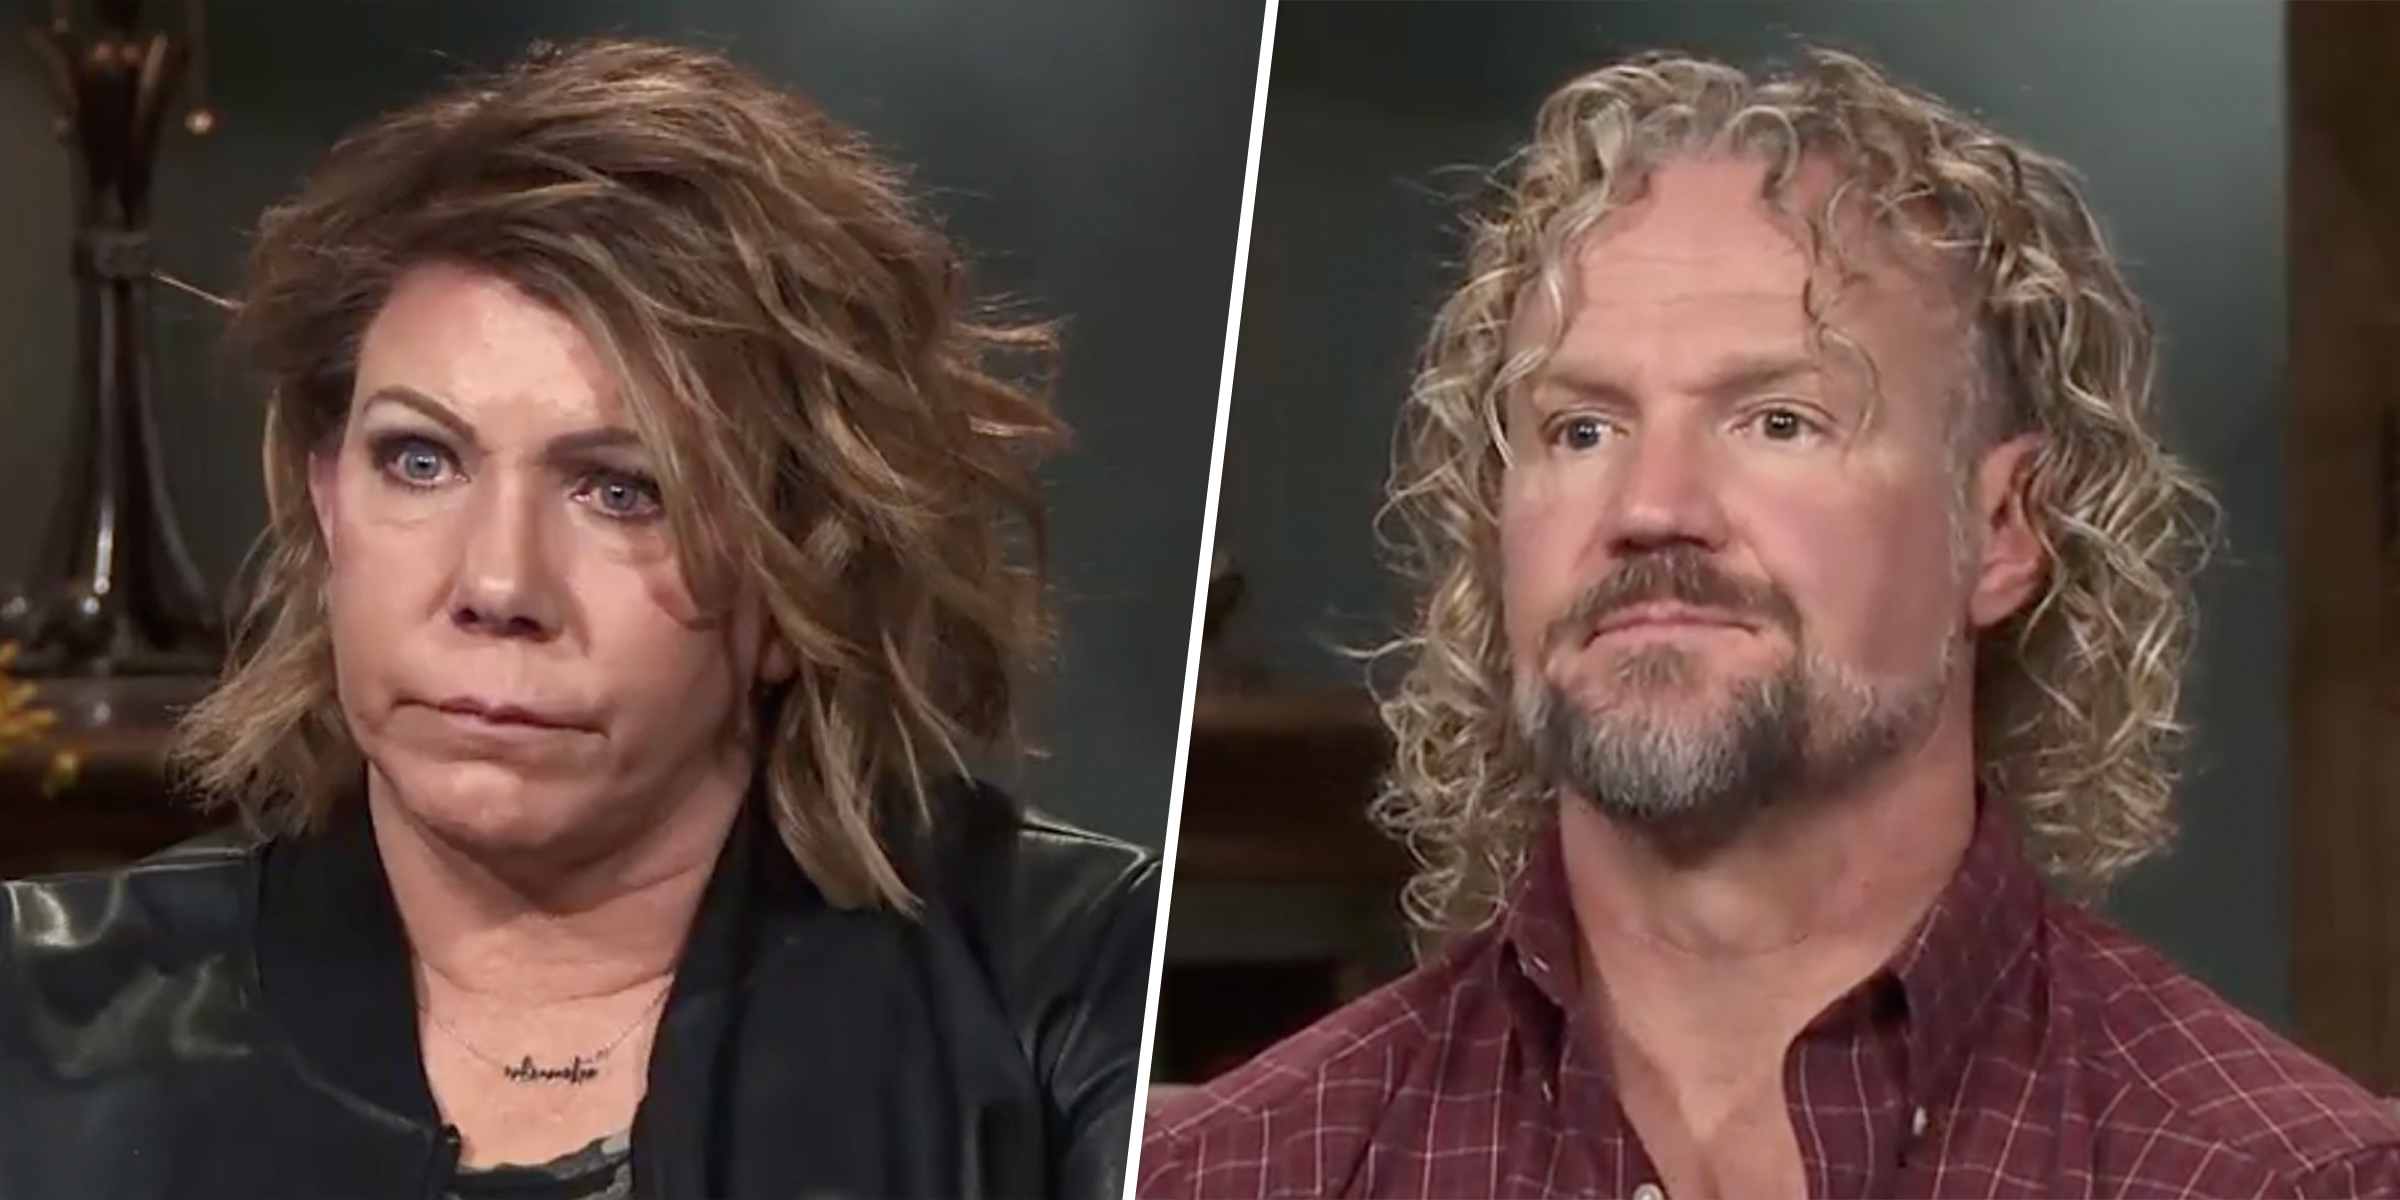 Sister Wives: Kody Brown is ‘Willing to Fake Being in Love’ With Meri Brown to Save Reality TV Show